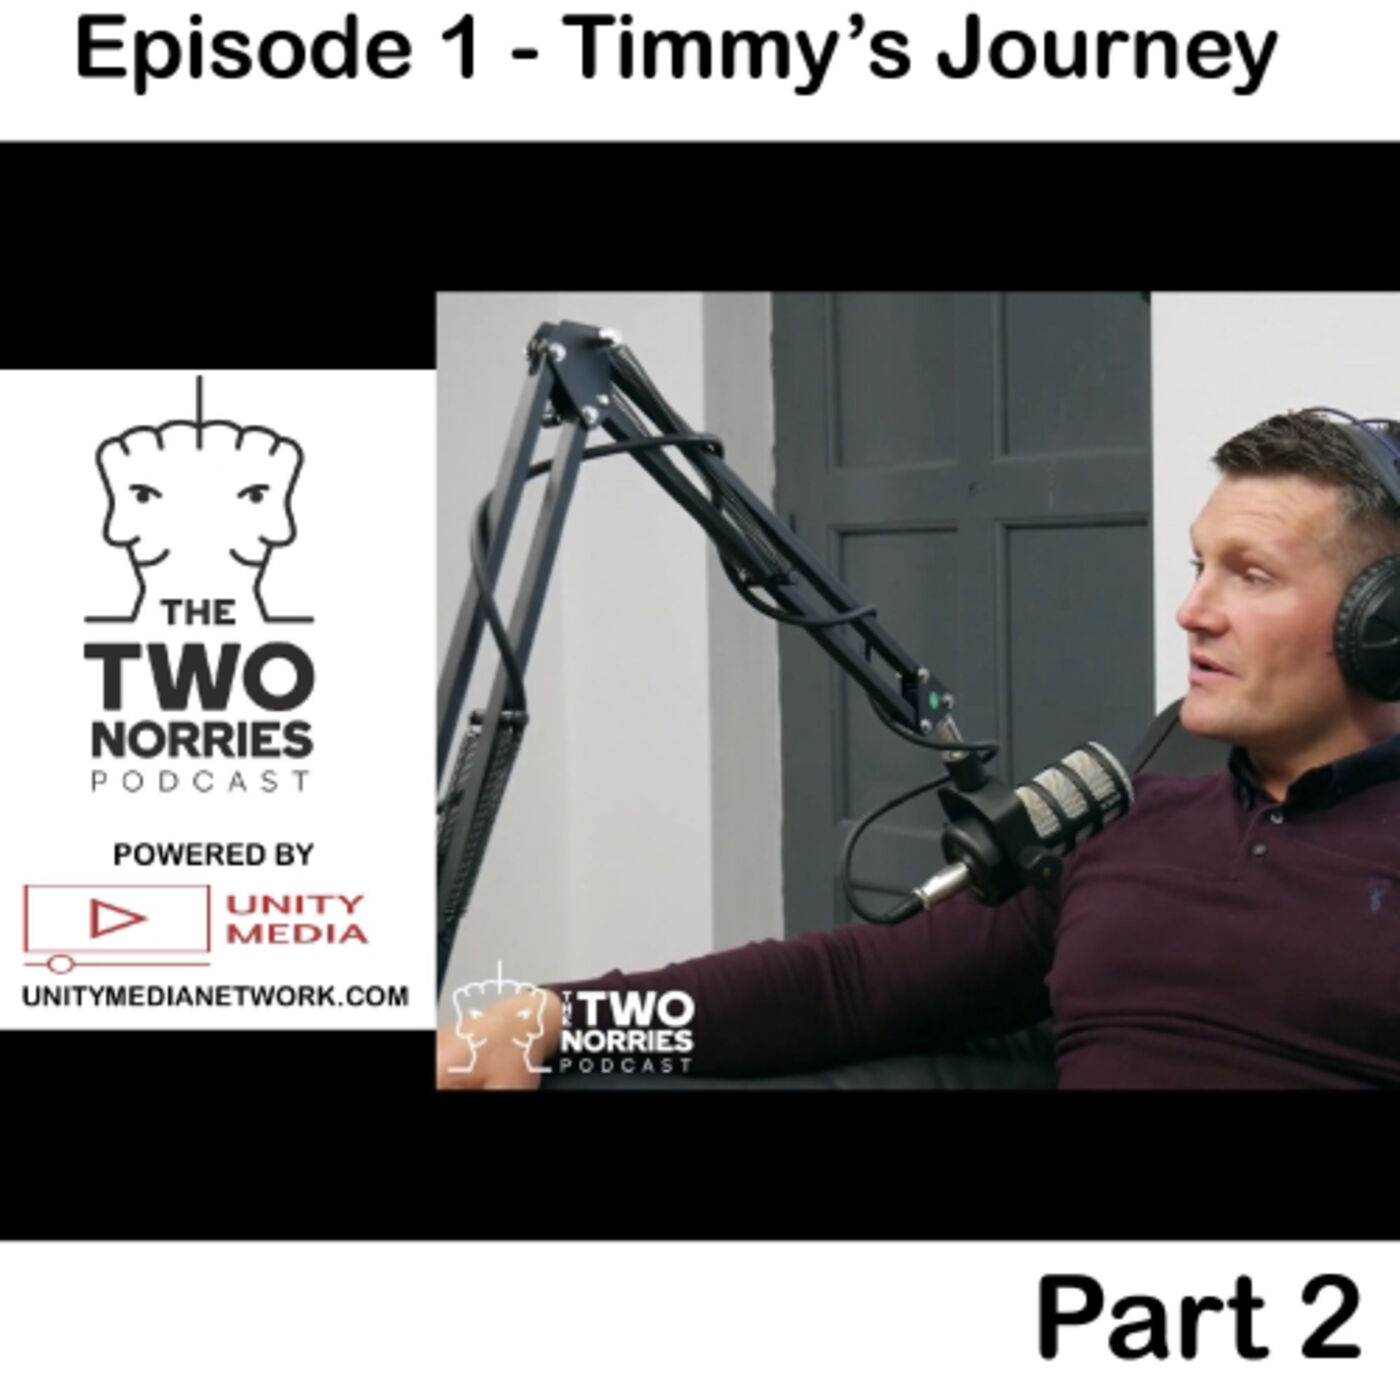 Podcast #2. Timmy's Journey (Part 2): From learning to read & write at 32 to bachelors degree at 39